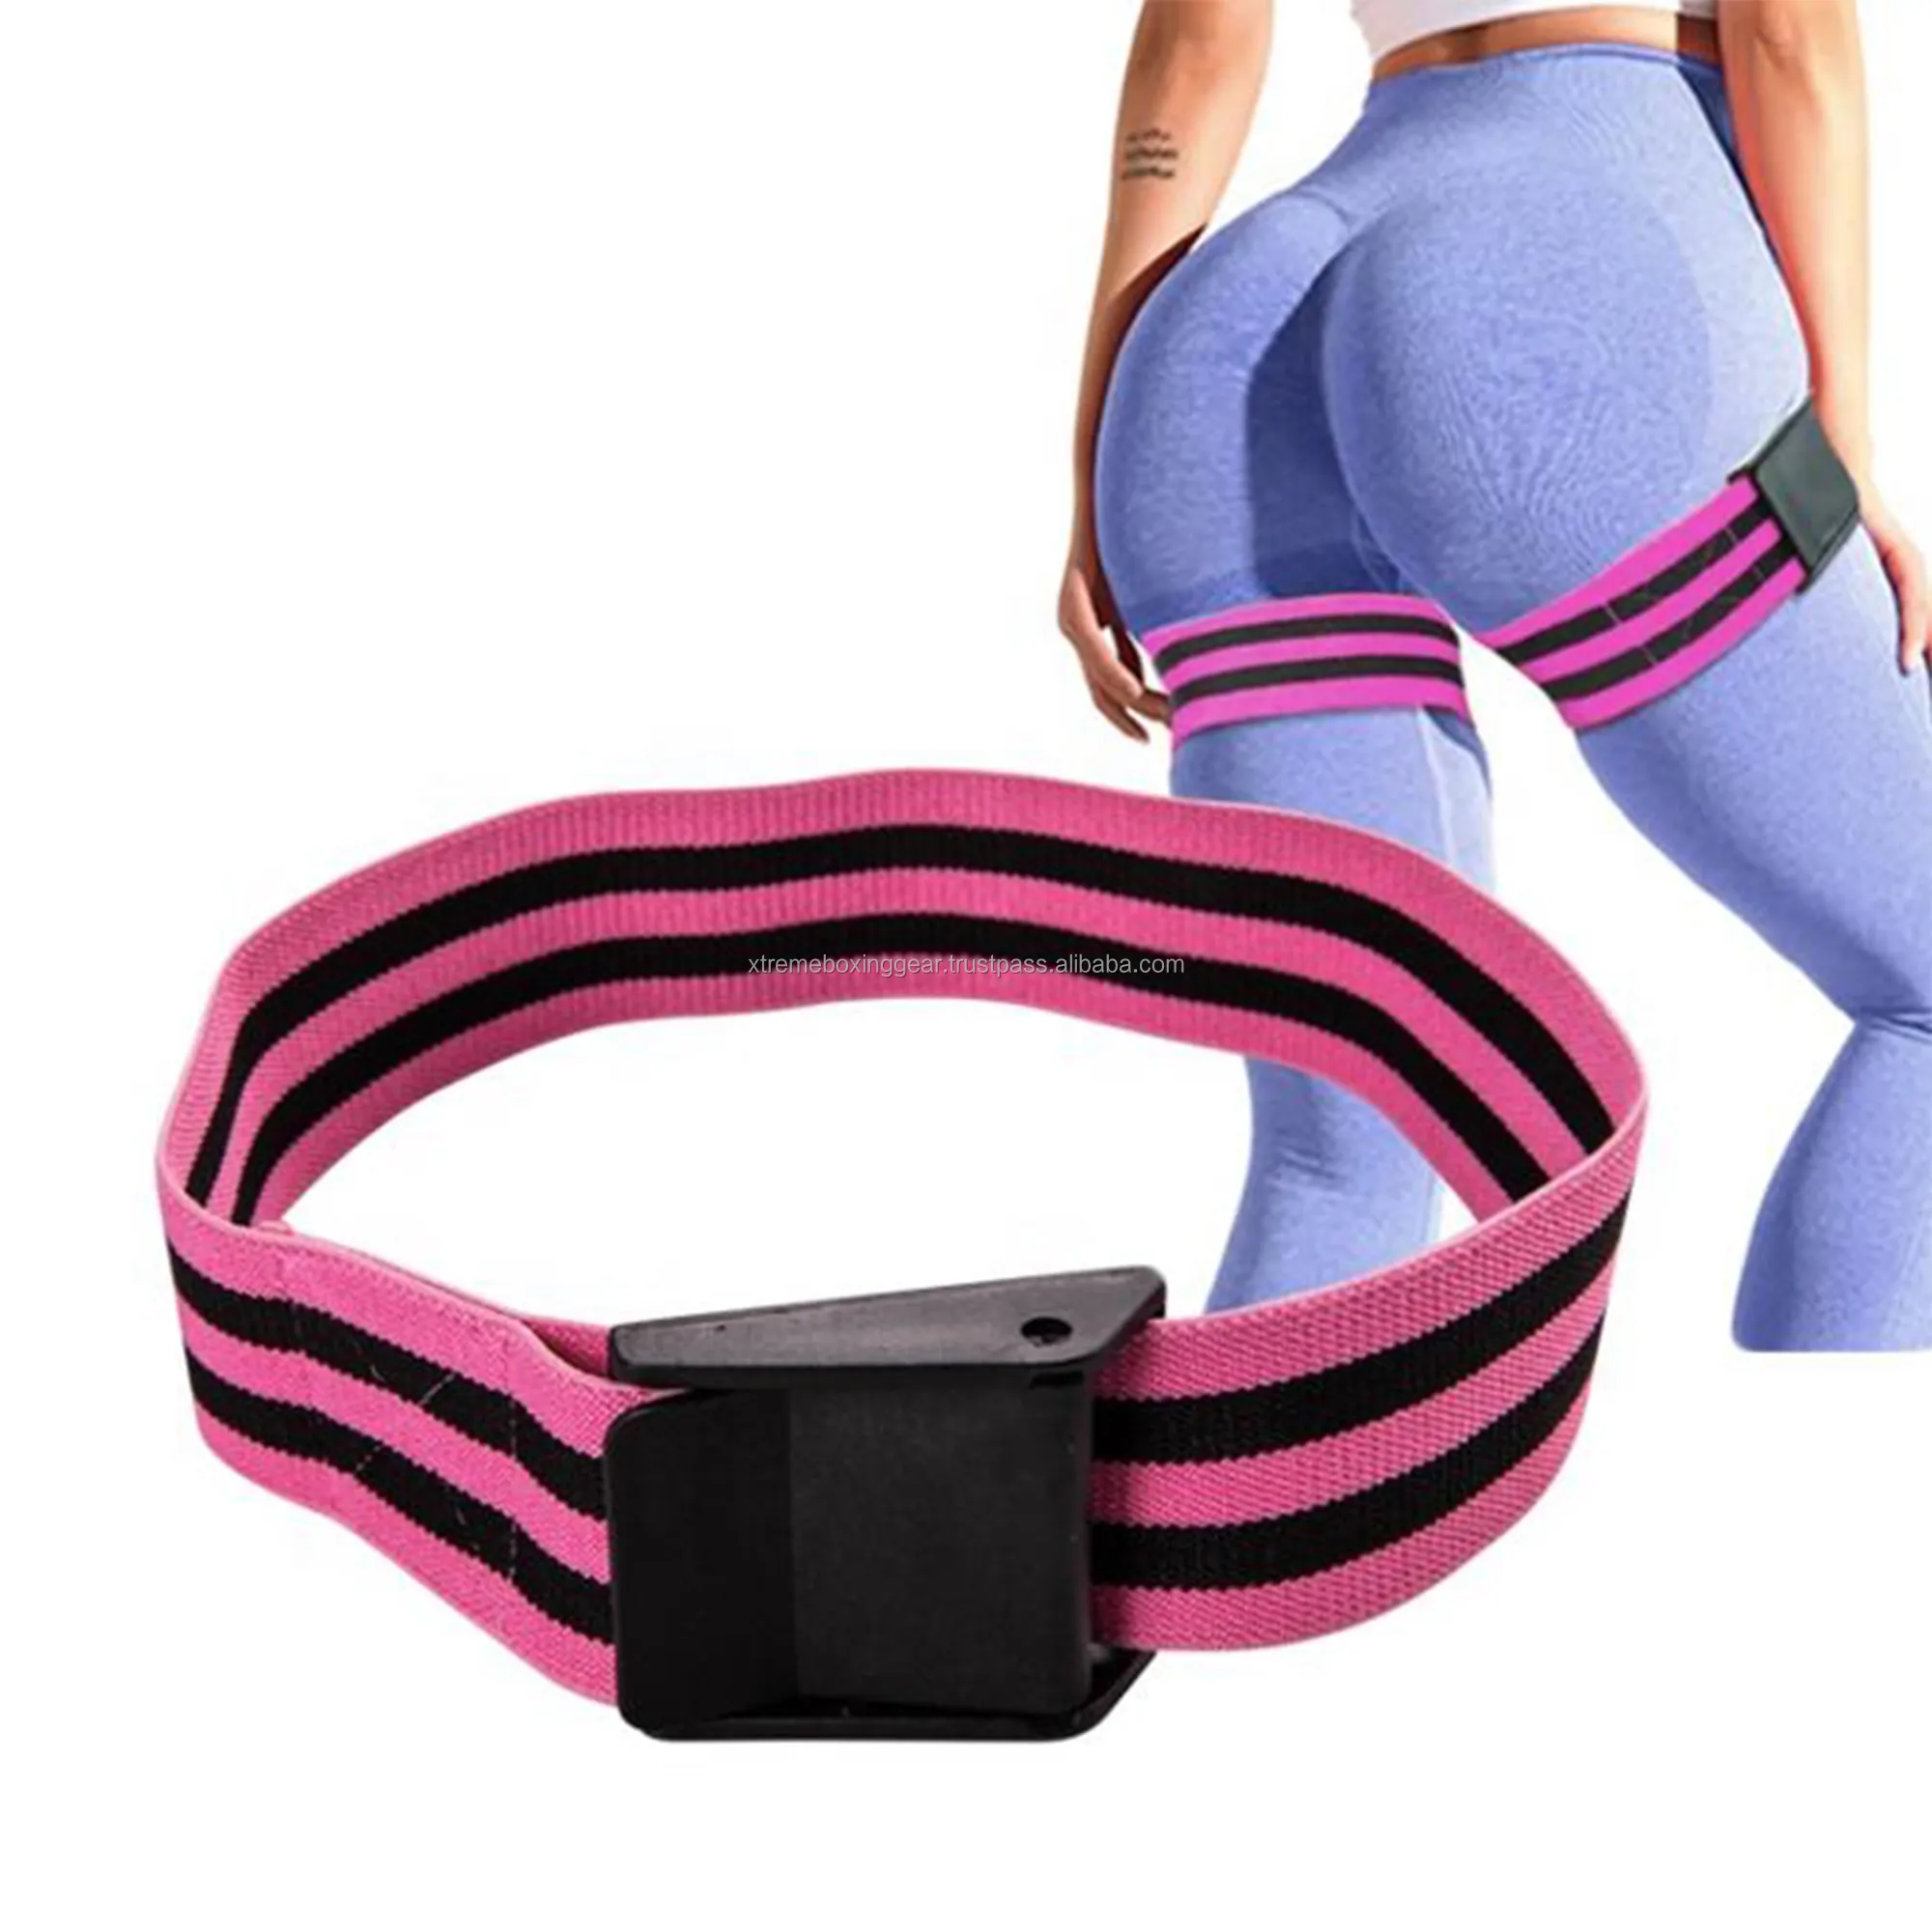 Low MOQ Custom Fitness BFR Bands Exercise Workout Stretch Weight Lifting Occlusion Training For Arm And Leg Muscle Growth Belt